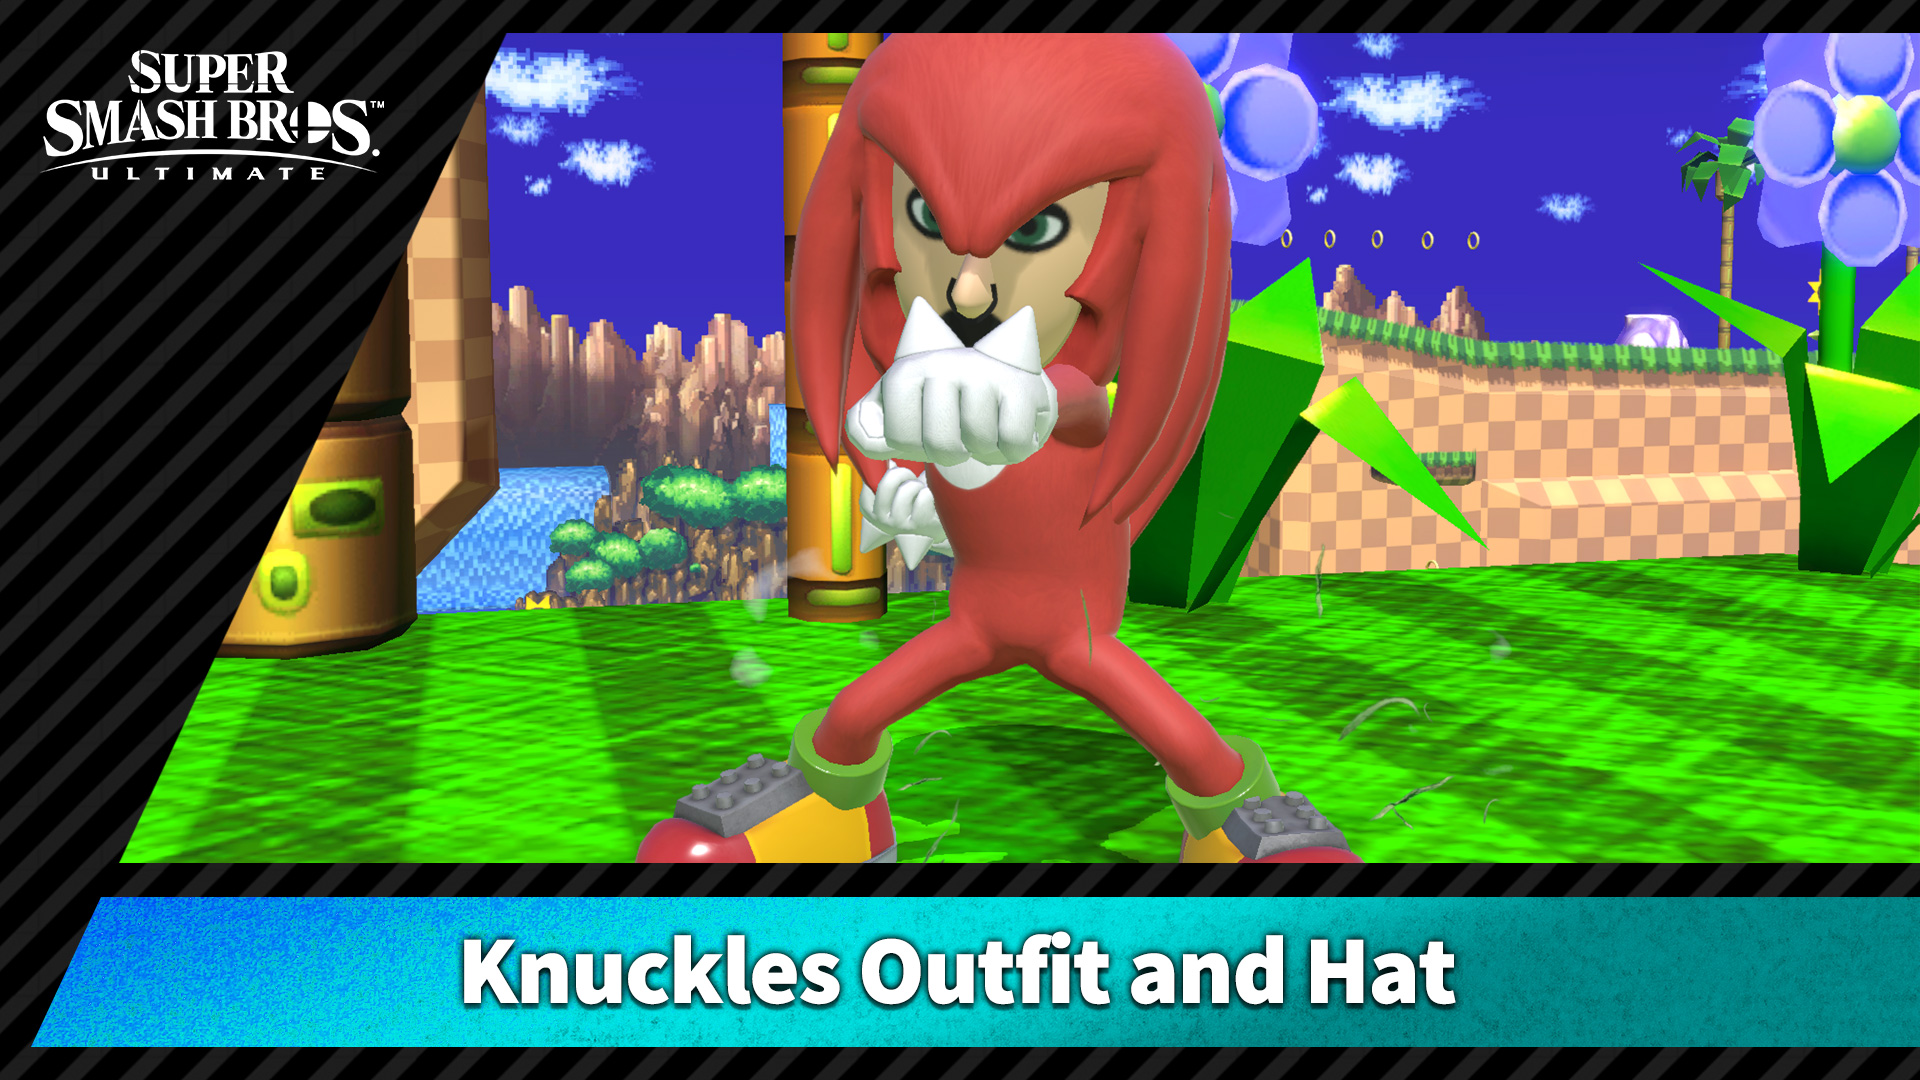 【Costume】Knuckles Outfit and Hat